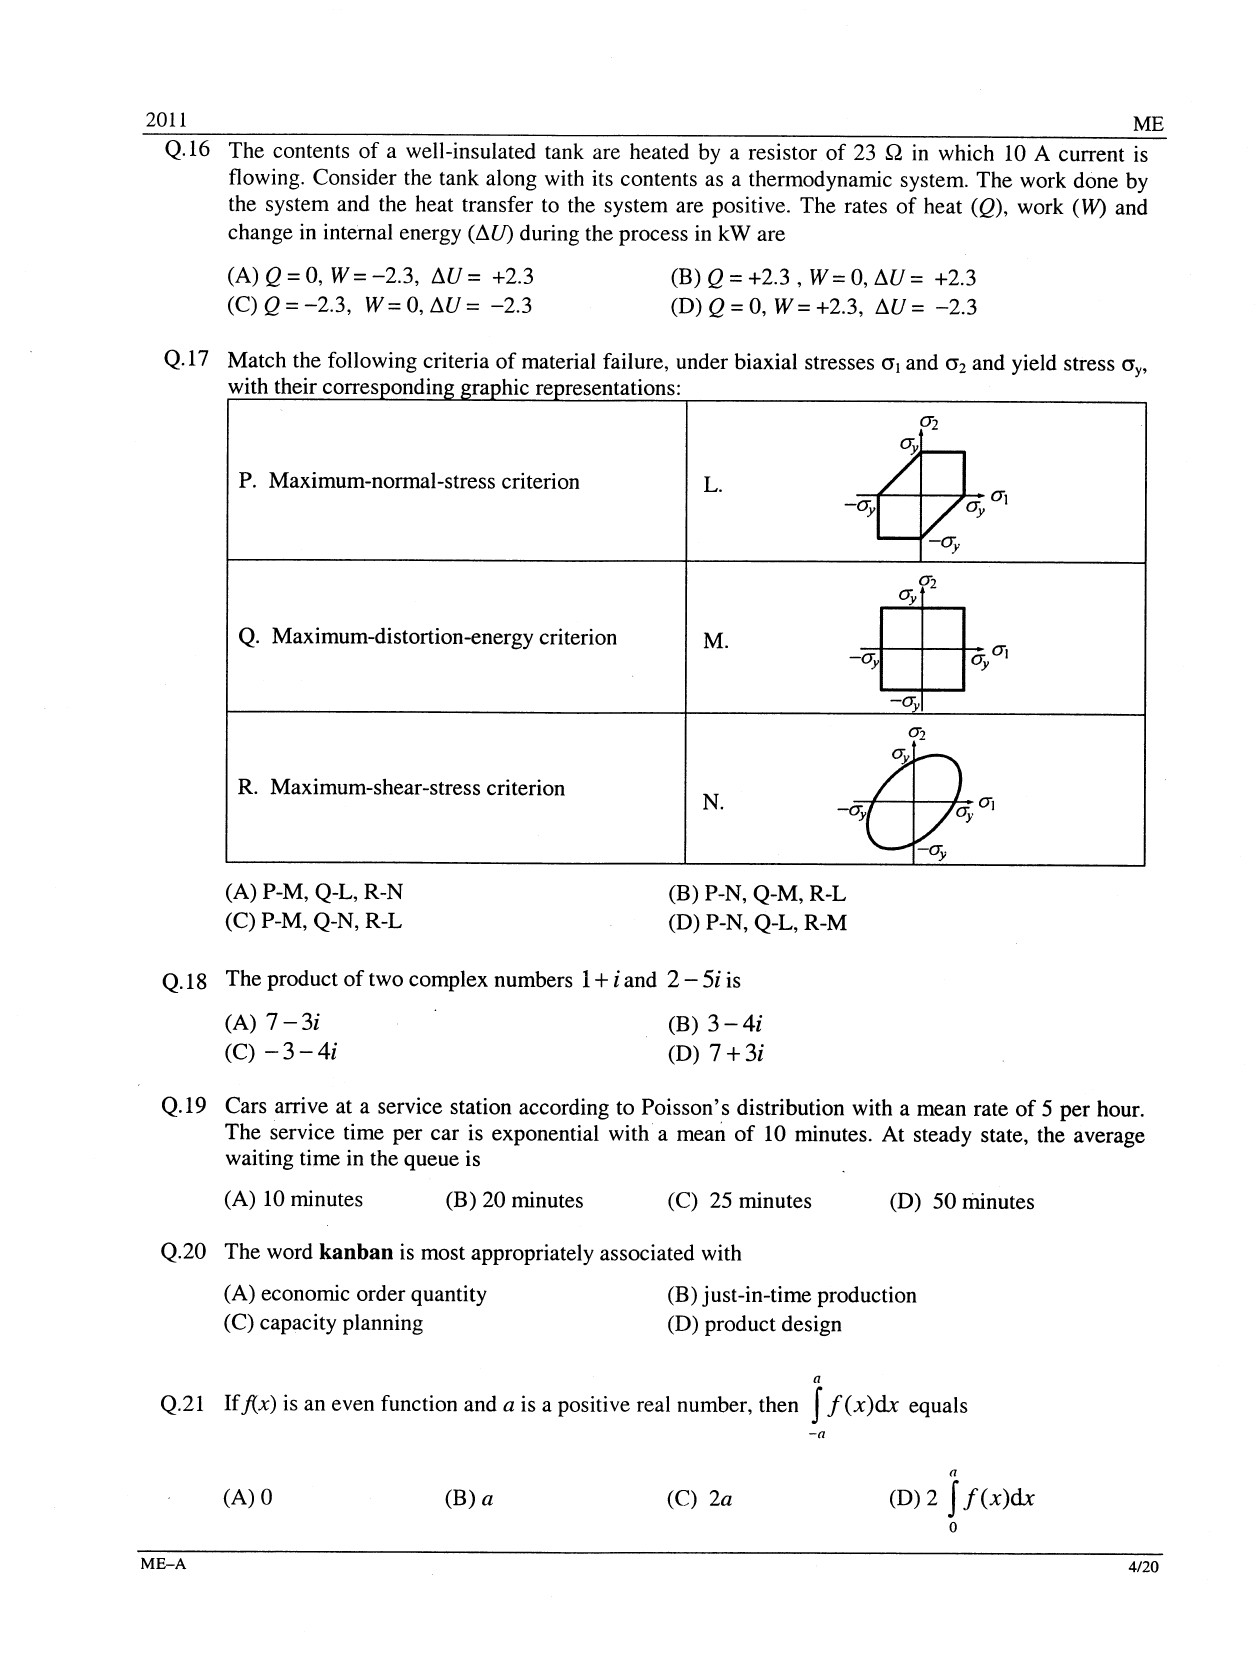 GATE Exam Question Paper 2011 Mechanical Engineering 4